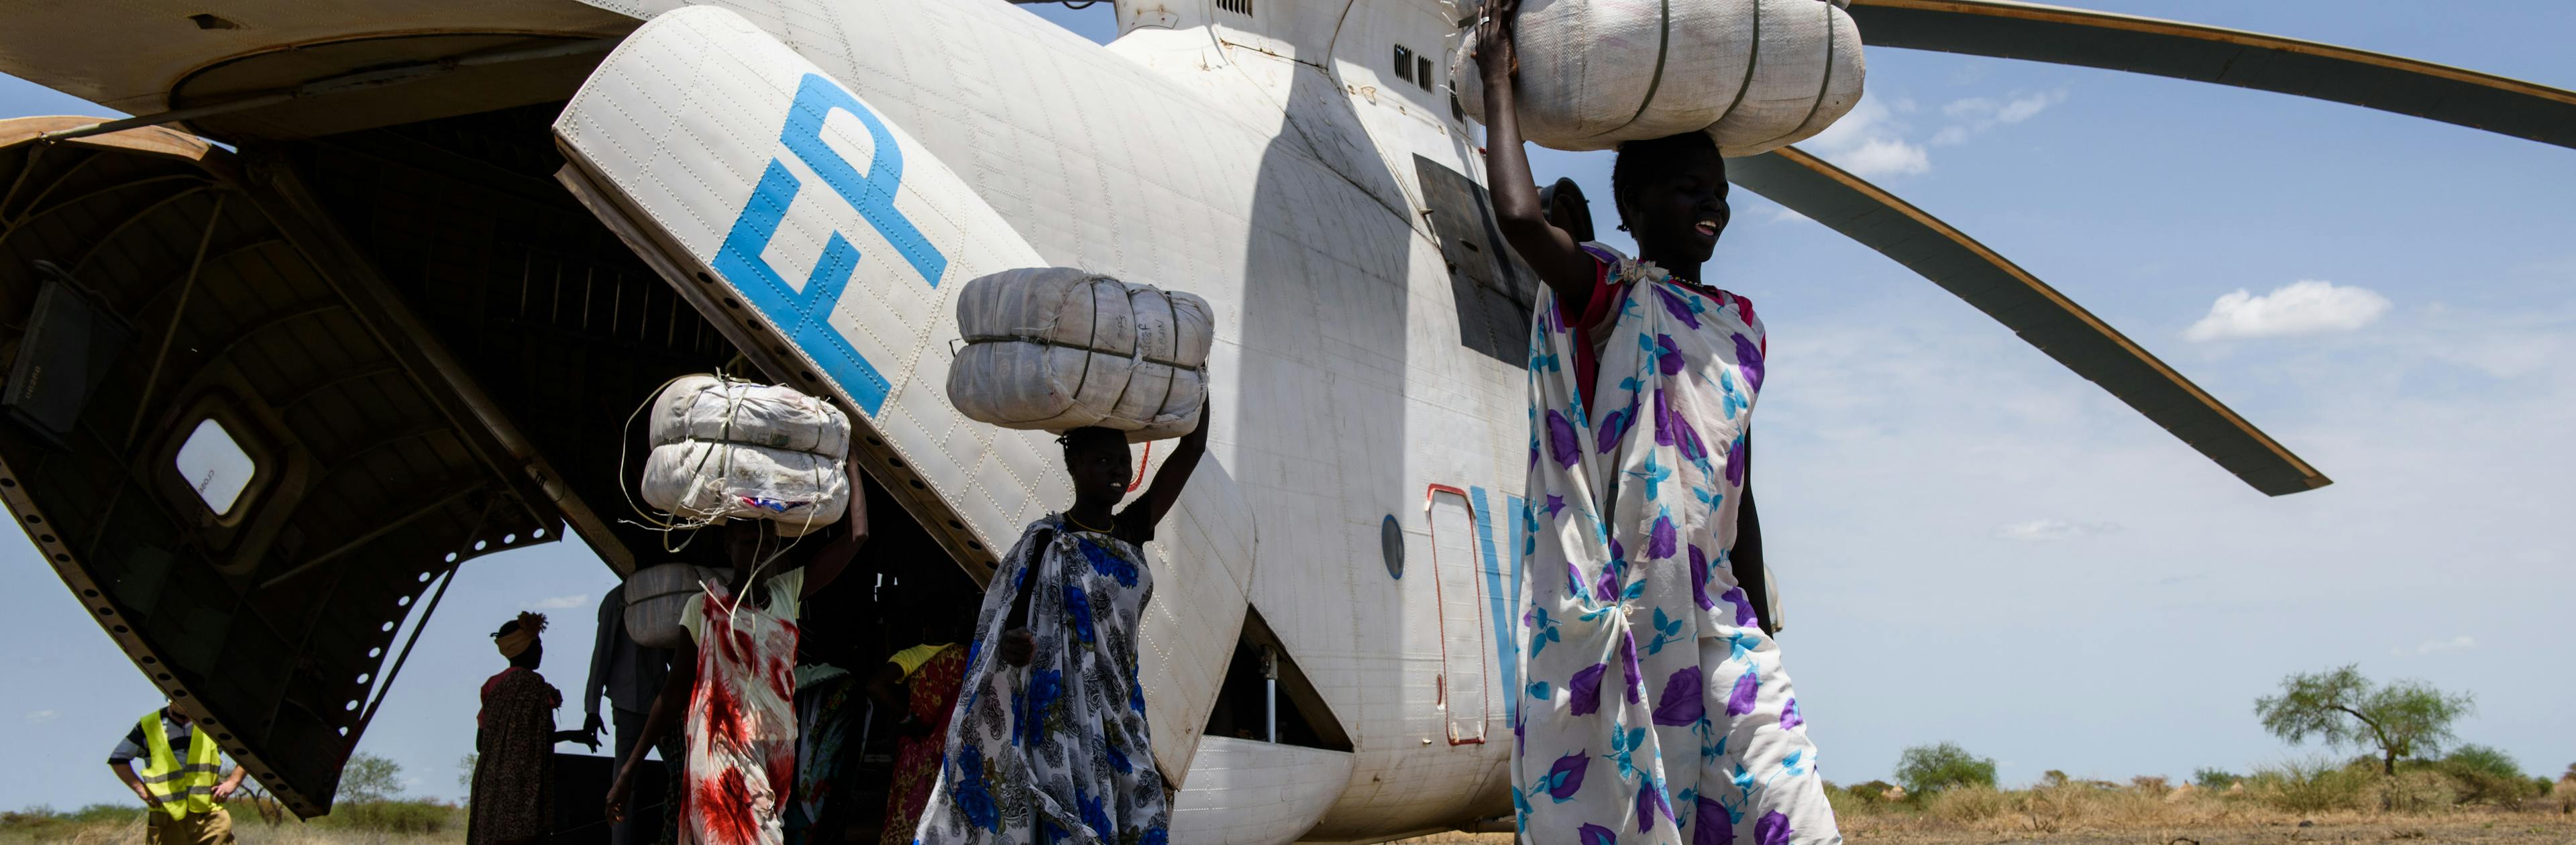 Porters carry bales of mosquito nets from a helicopter during a Rapid Response Mission in the village of Aburoc, South Sudan